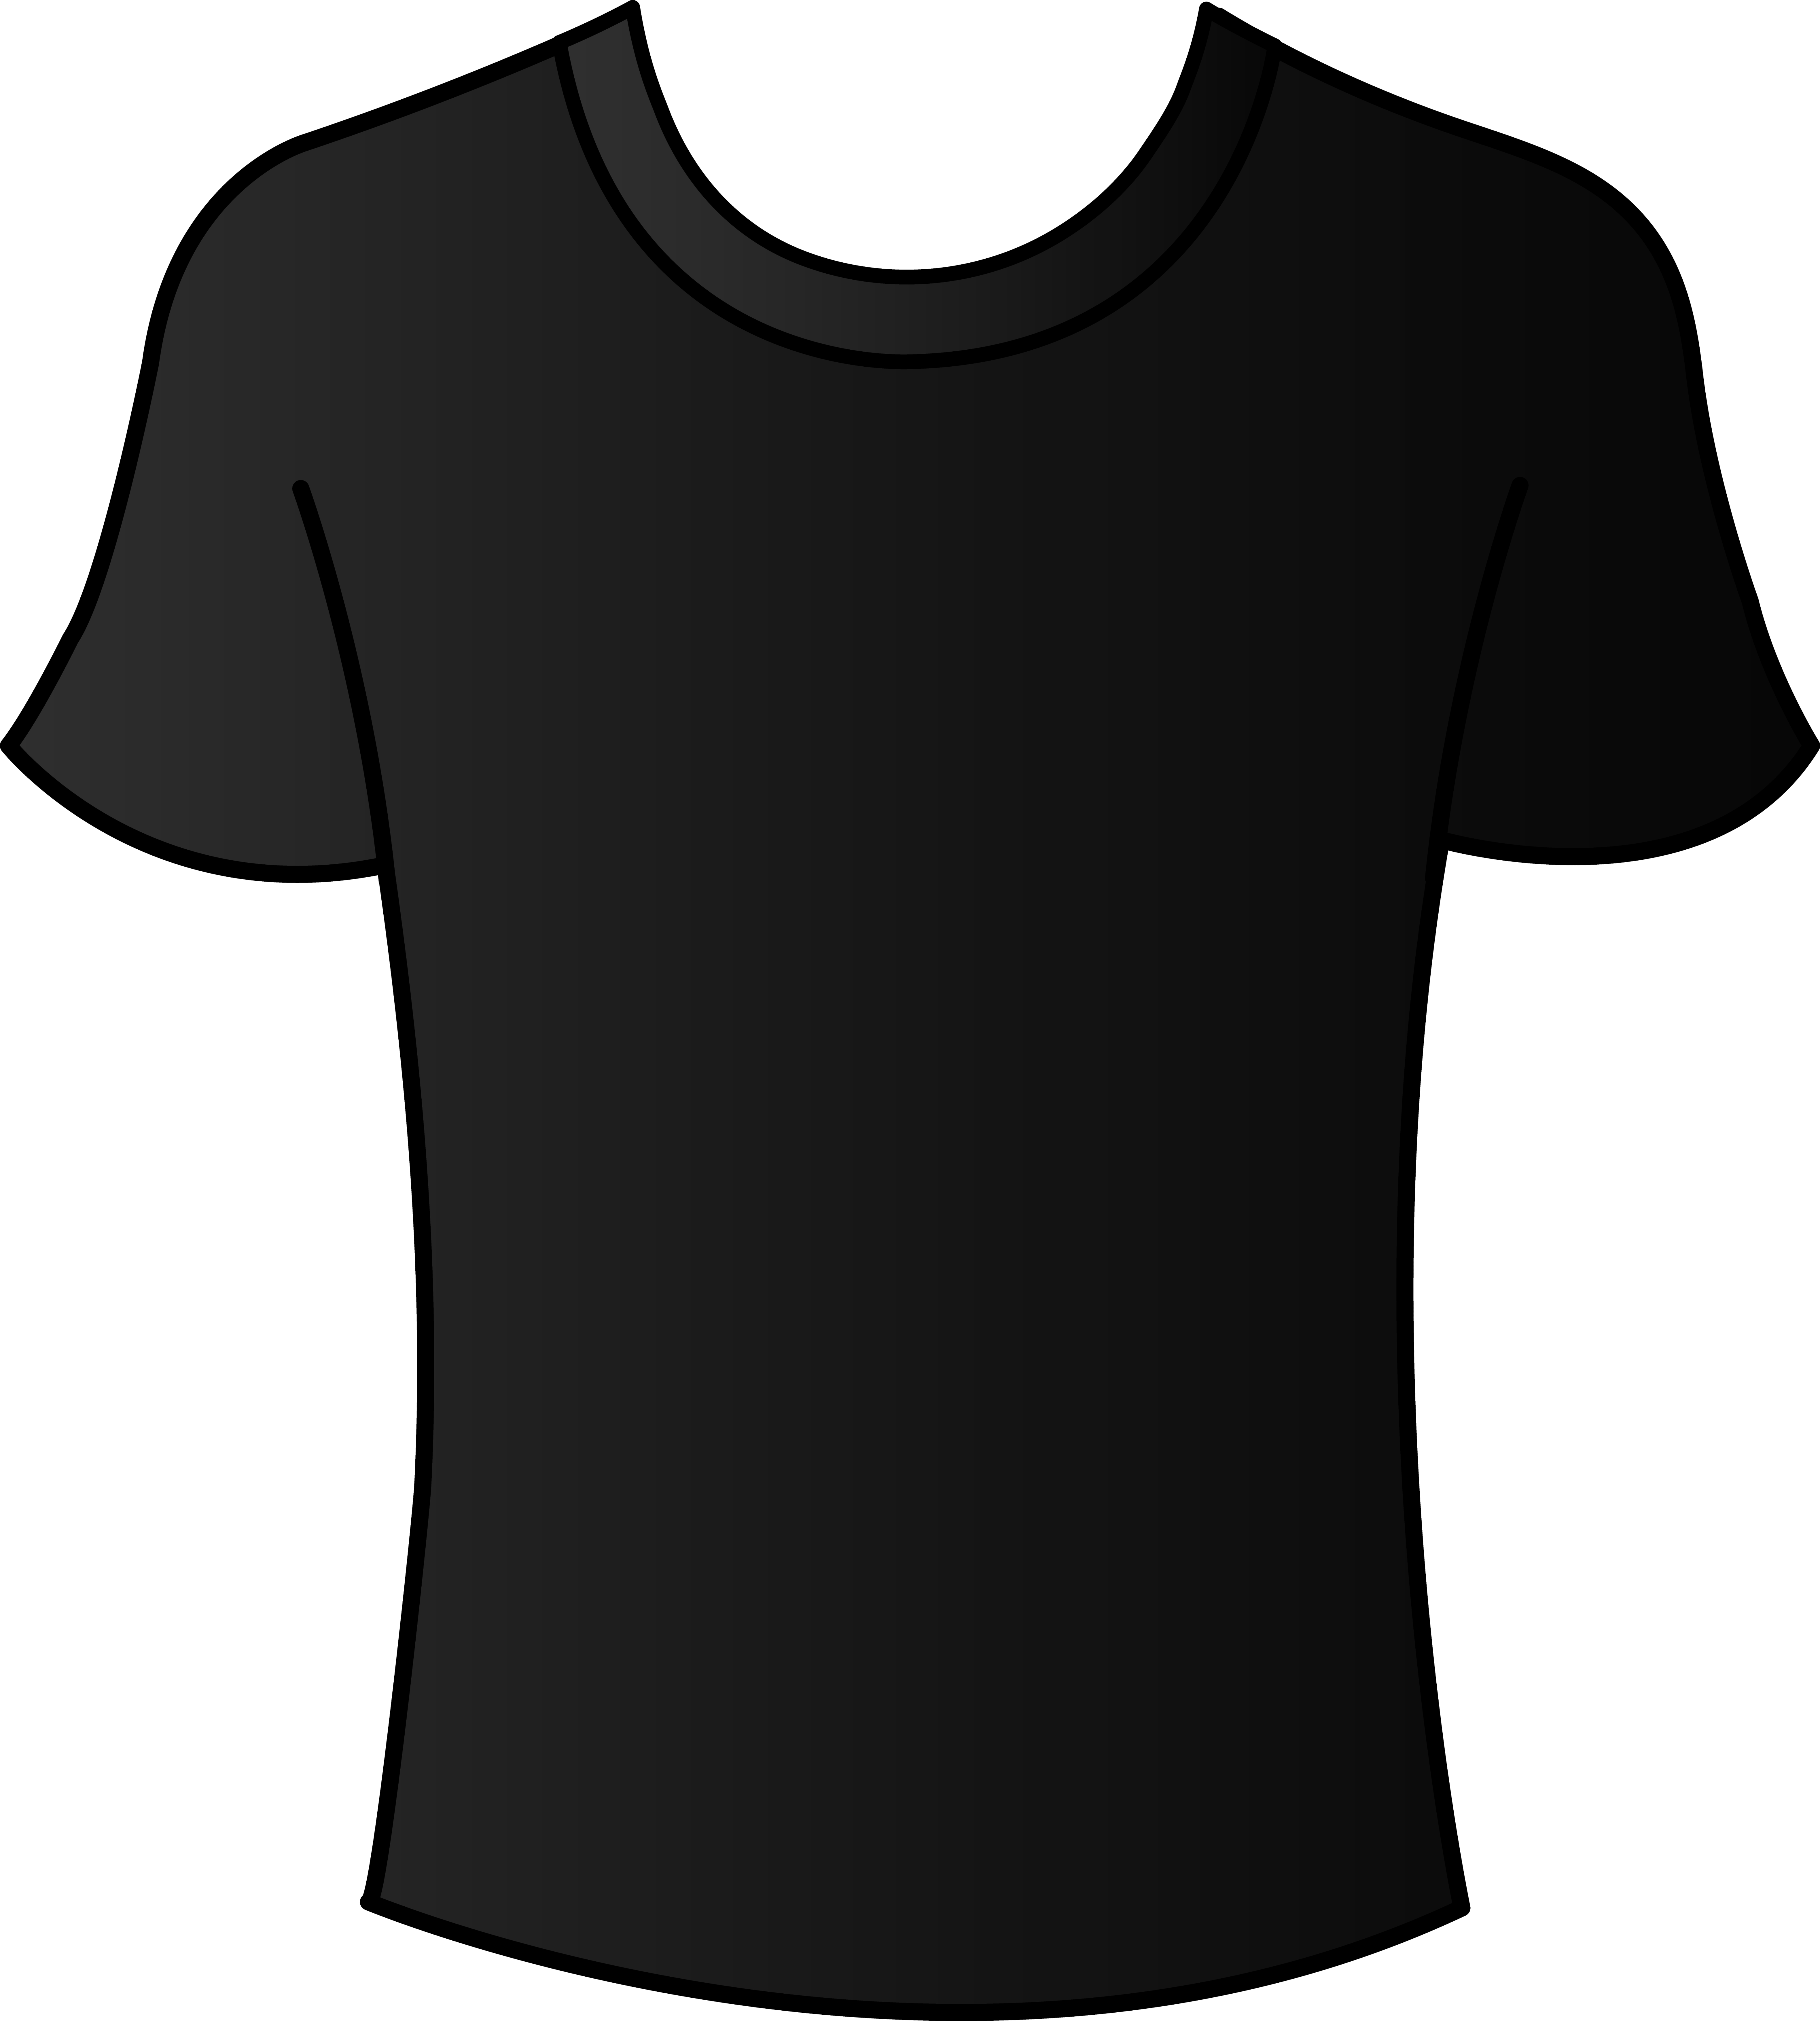 Back Of Shirt Template. plain black t front and blank t. real t ...